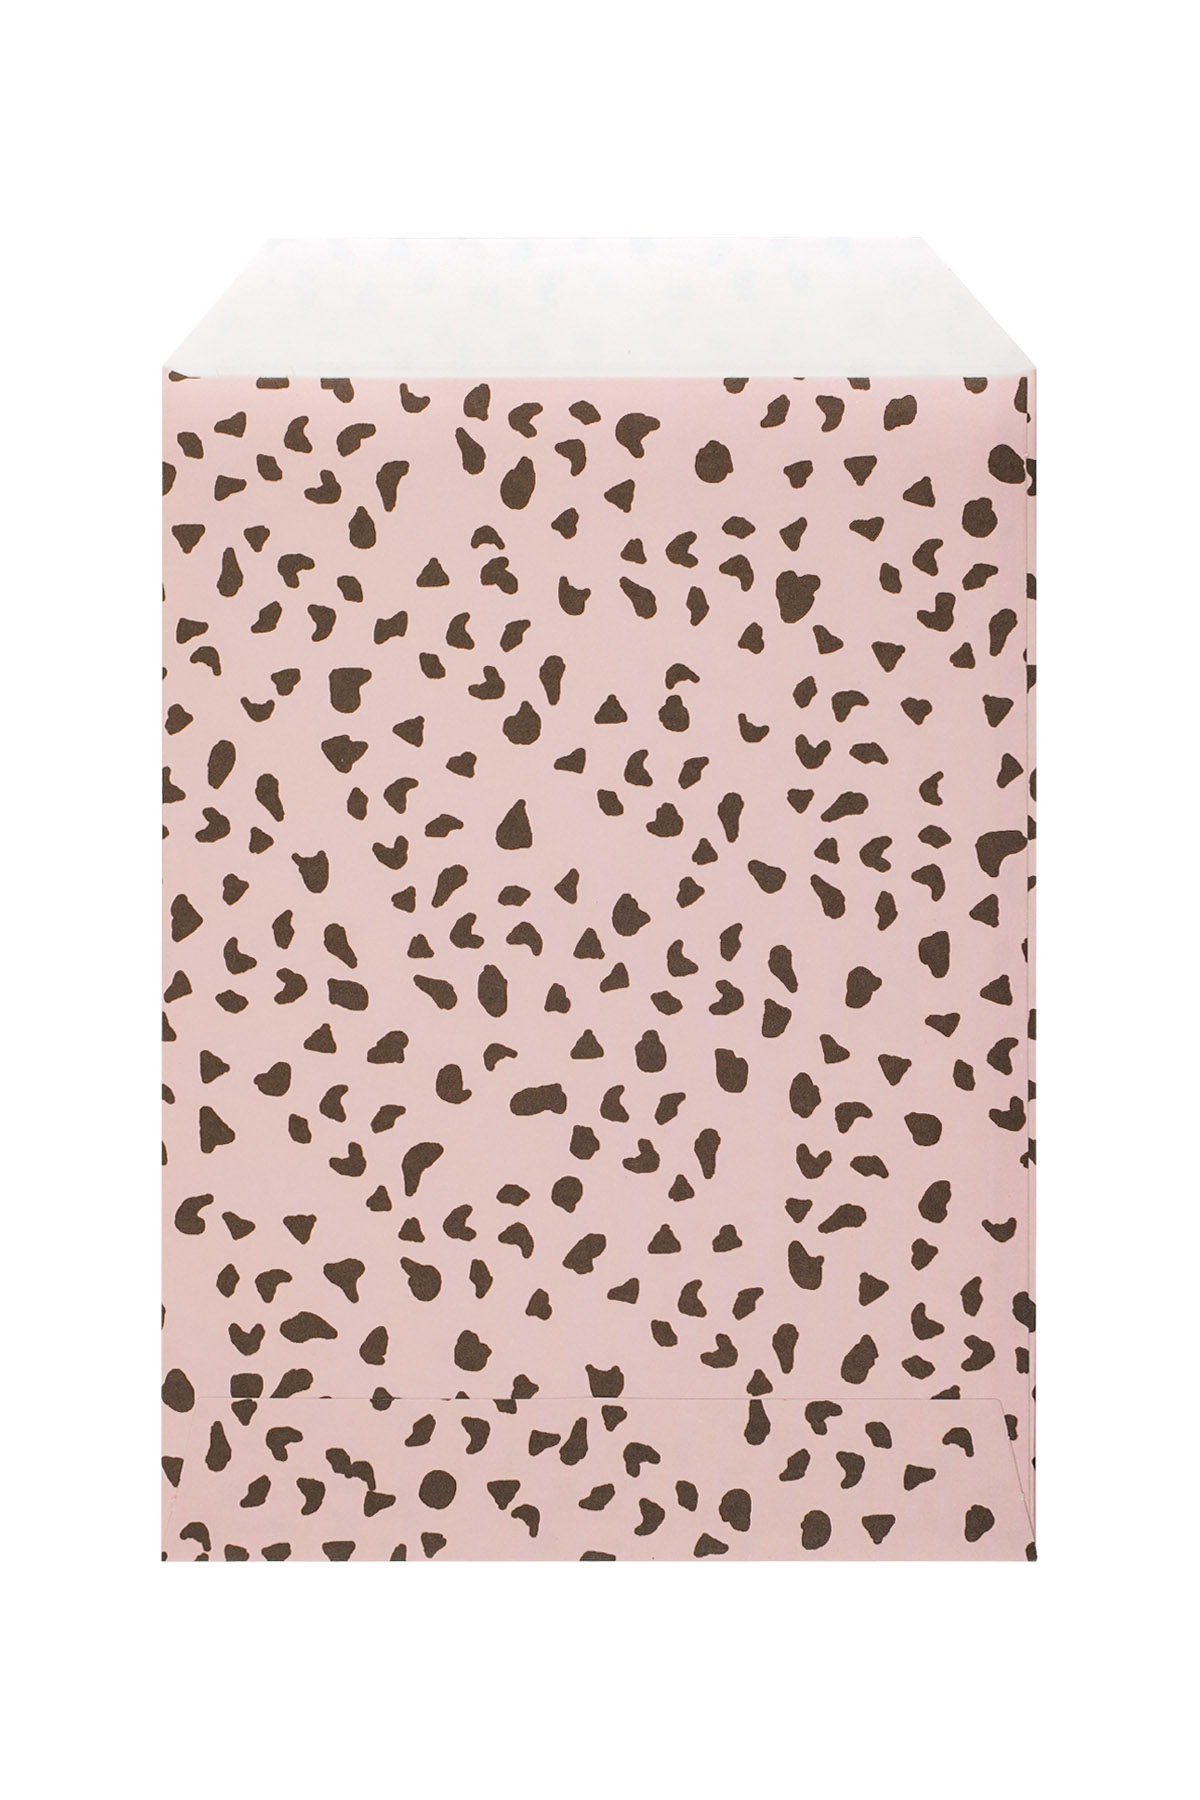 Jewelery envelope with dots pink h5 Picture2